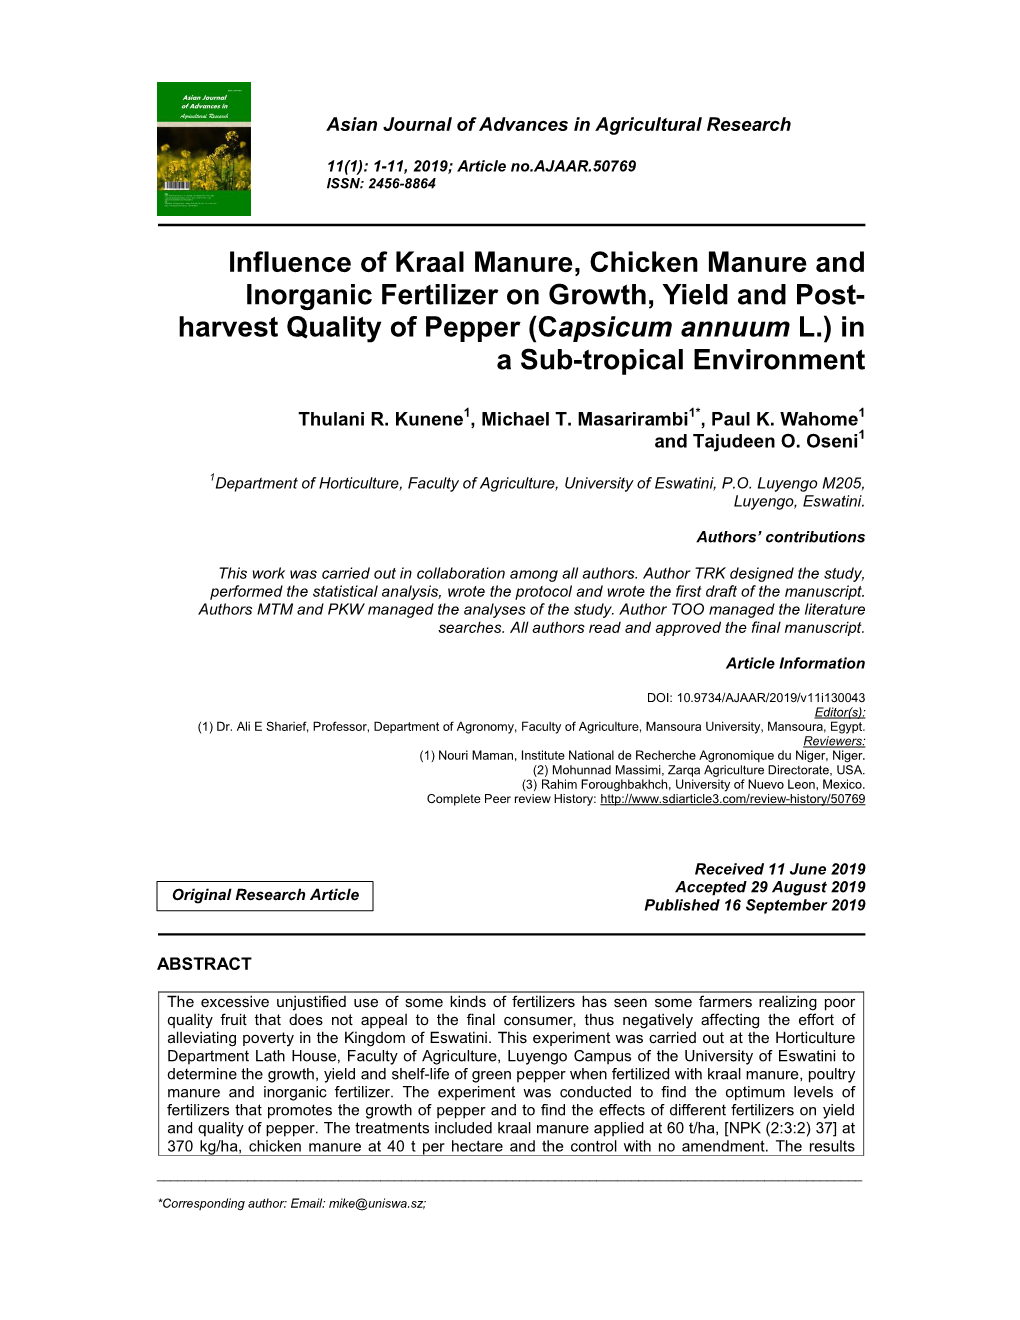 Influence of Kraal Manure, Chicken Manure and Inorganic Fertilizer On